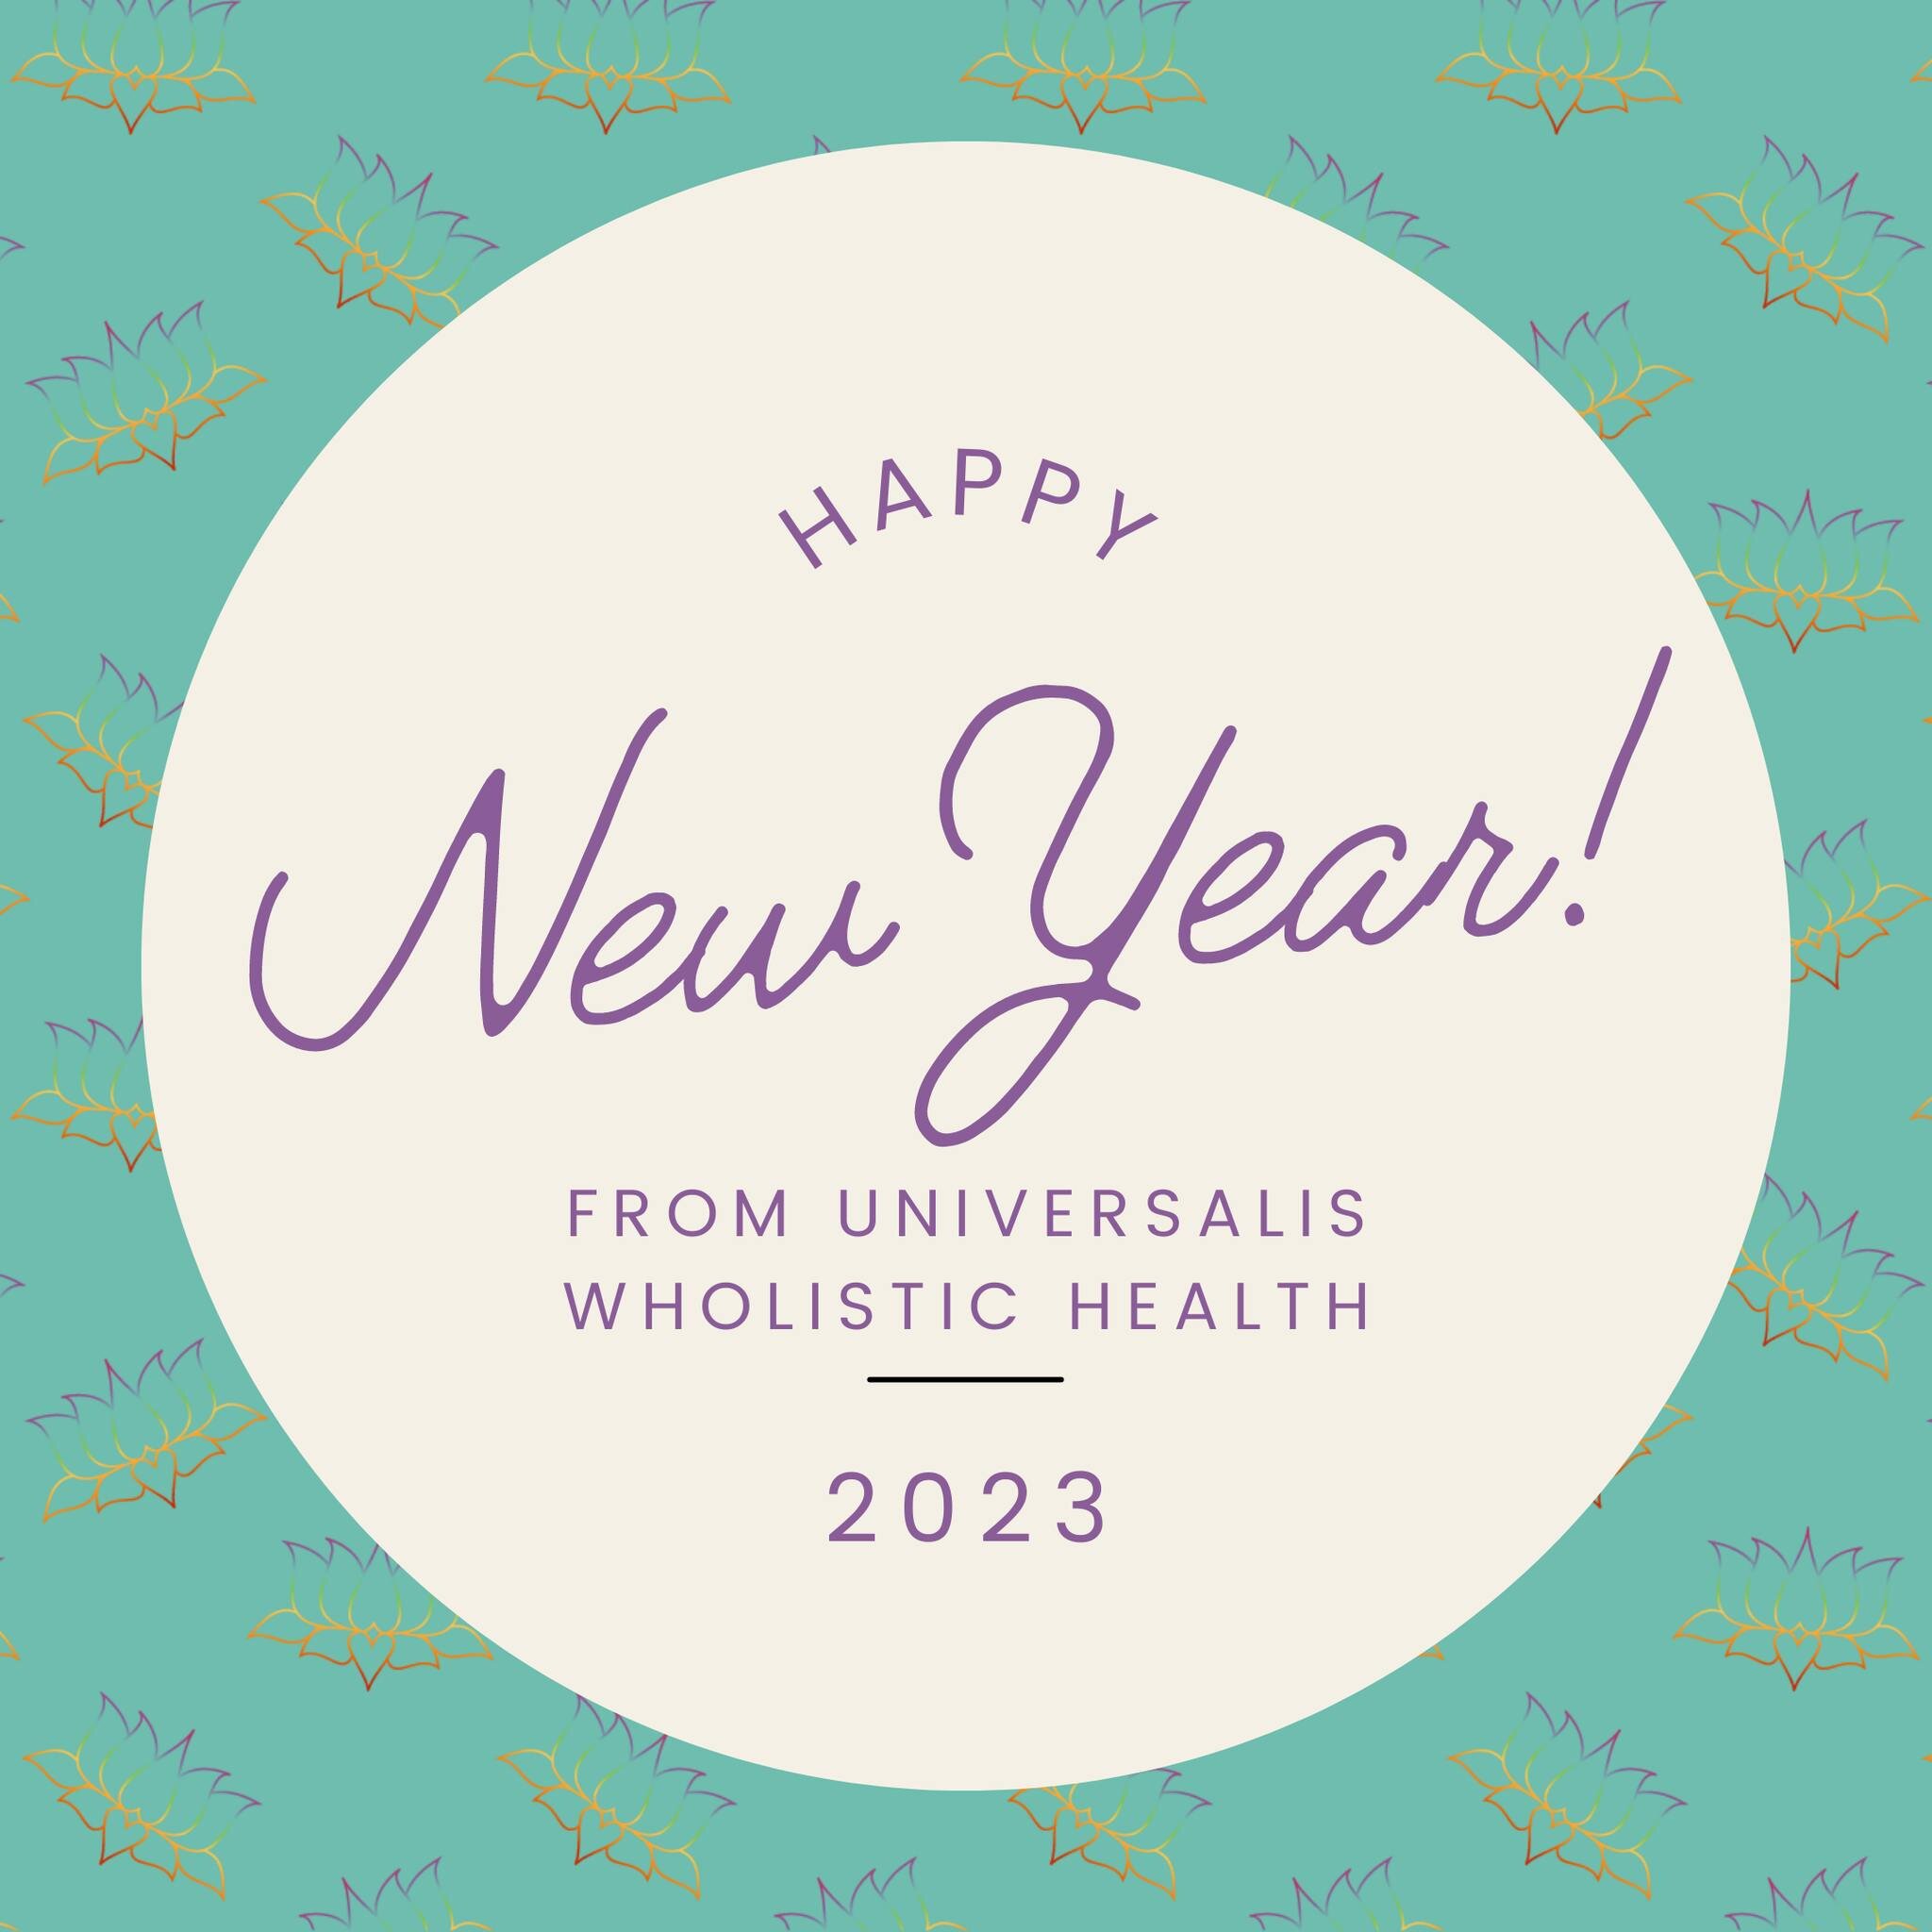 Happy New Year from us at Universalis Wholistic Health. What are your wellness goals this year? Comment below and let us know how we can help you achieve them today!  #healthandwellness #happynewyear2023 #goals #wellness  #localbusiness #privatepract